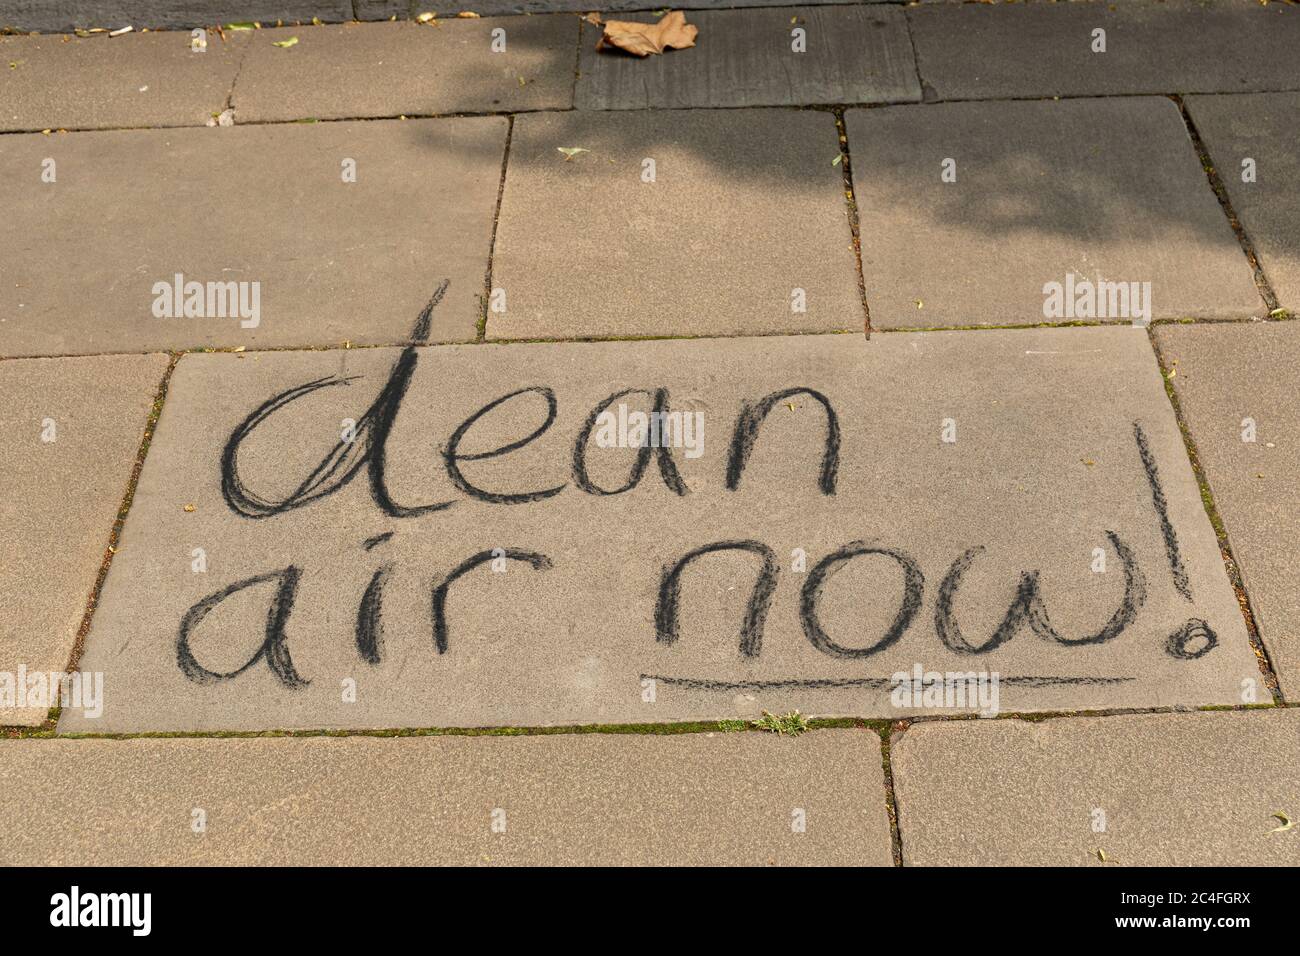 Clean Air now!  written on the pavement in the City of Bristol, England, UK Stock Photo